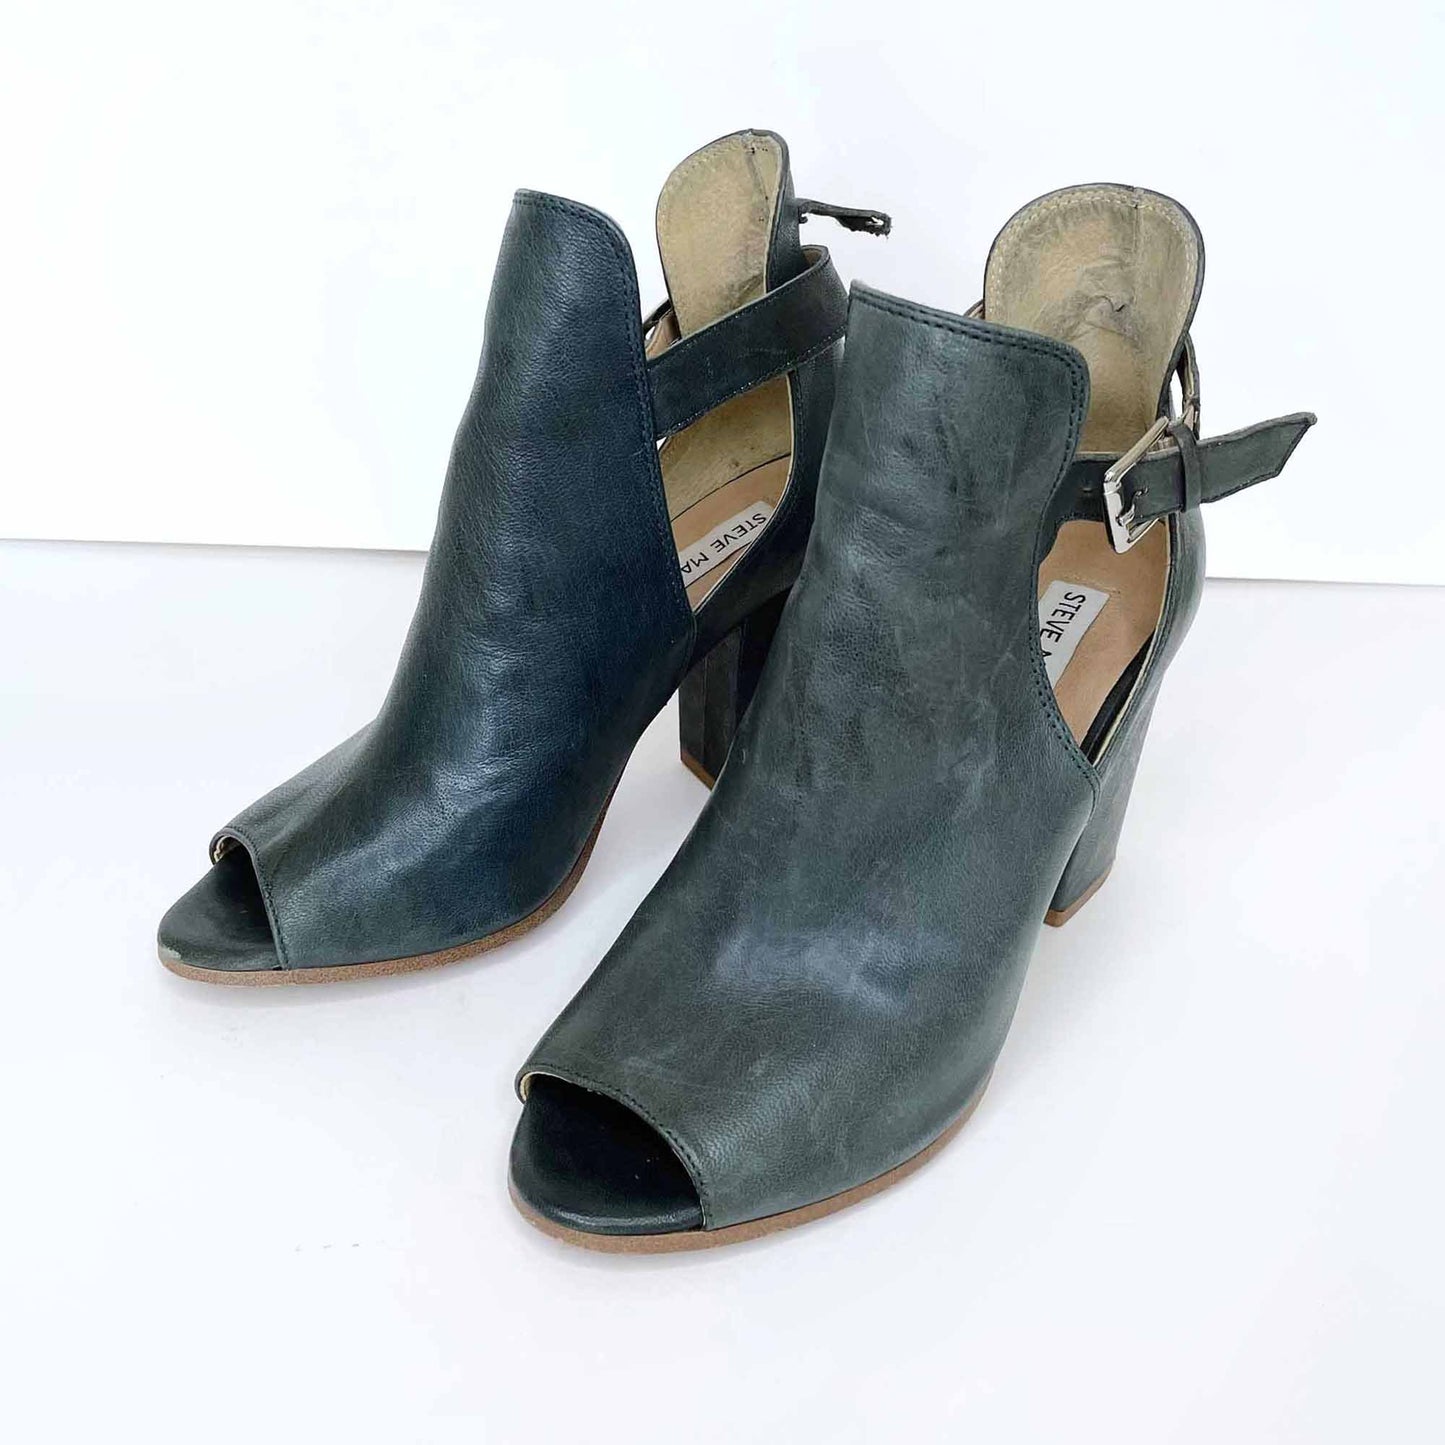 steve madden leather peep toe ankle booties - size 39